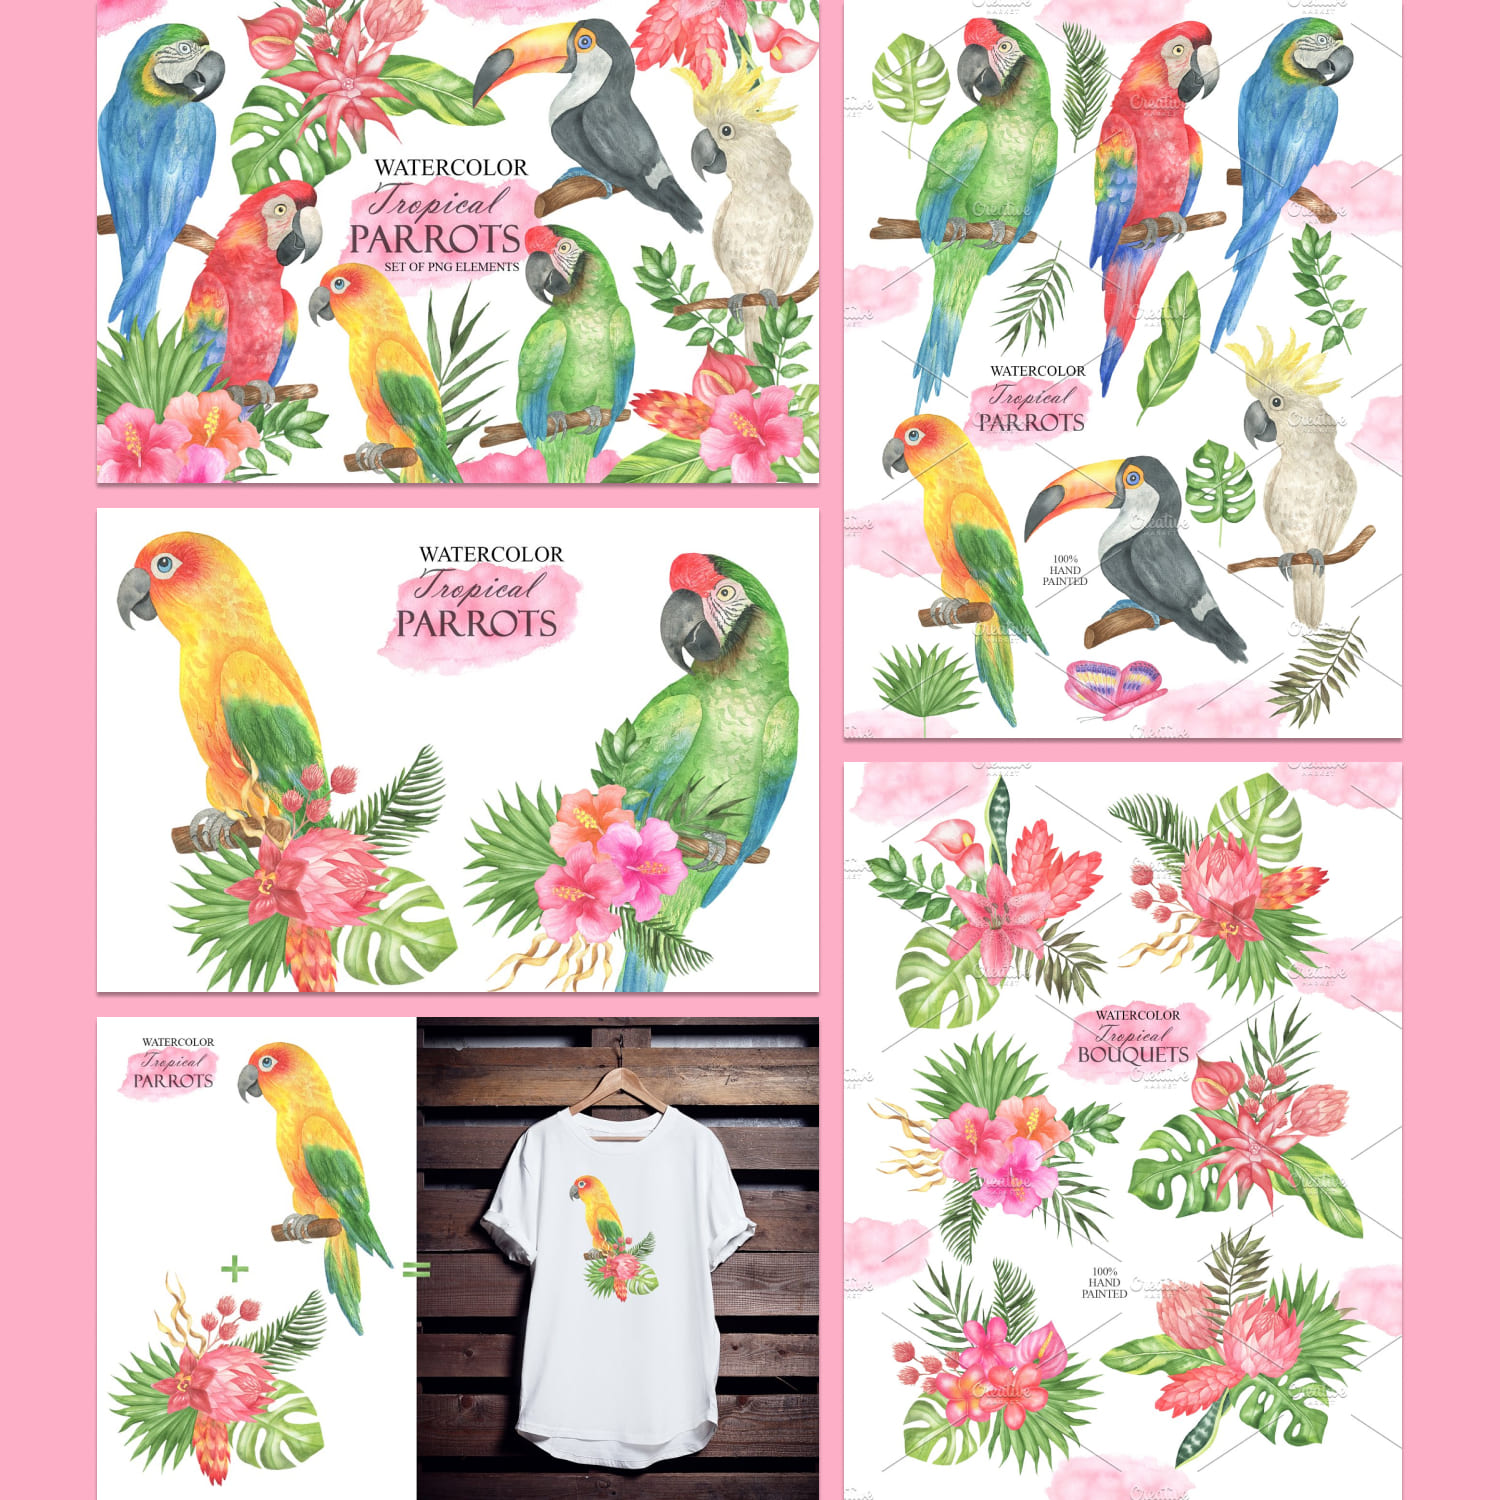 Watercolor Tropical Parrots created by OlDm_Shop.